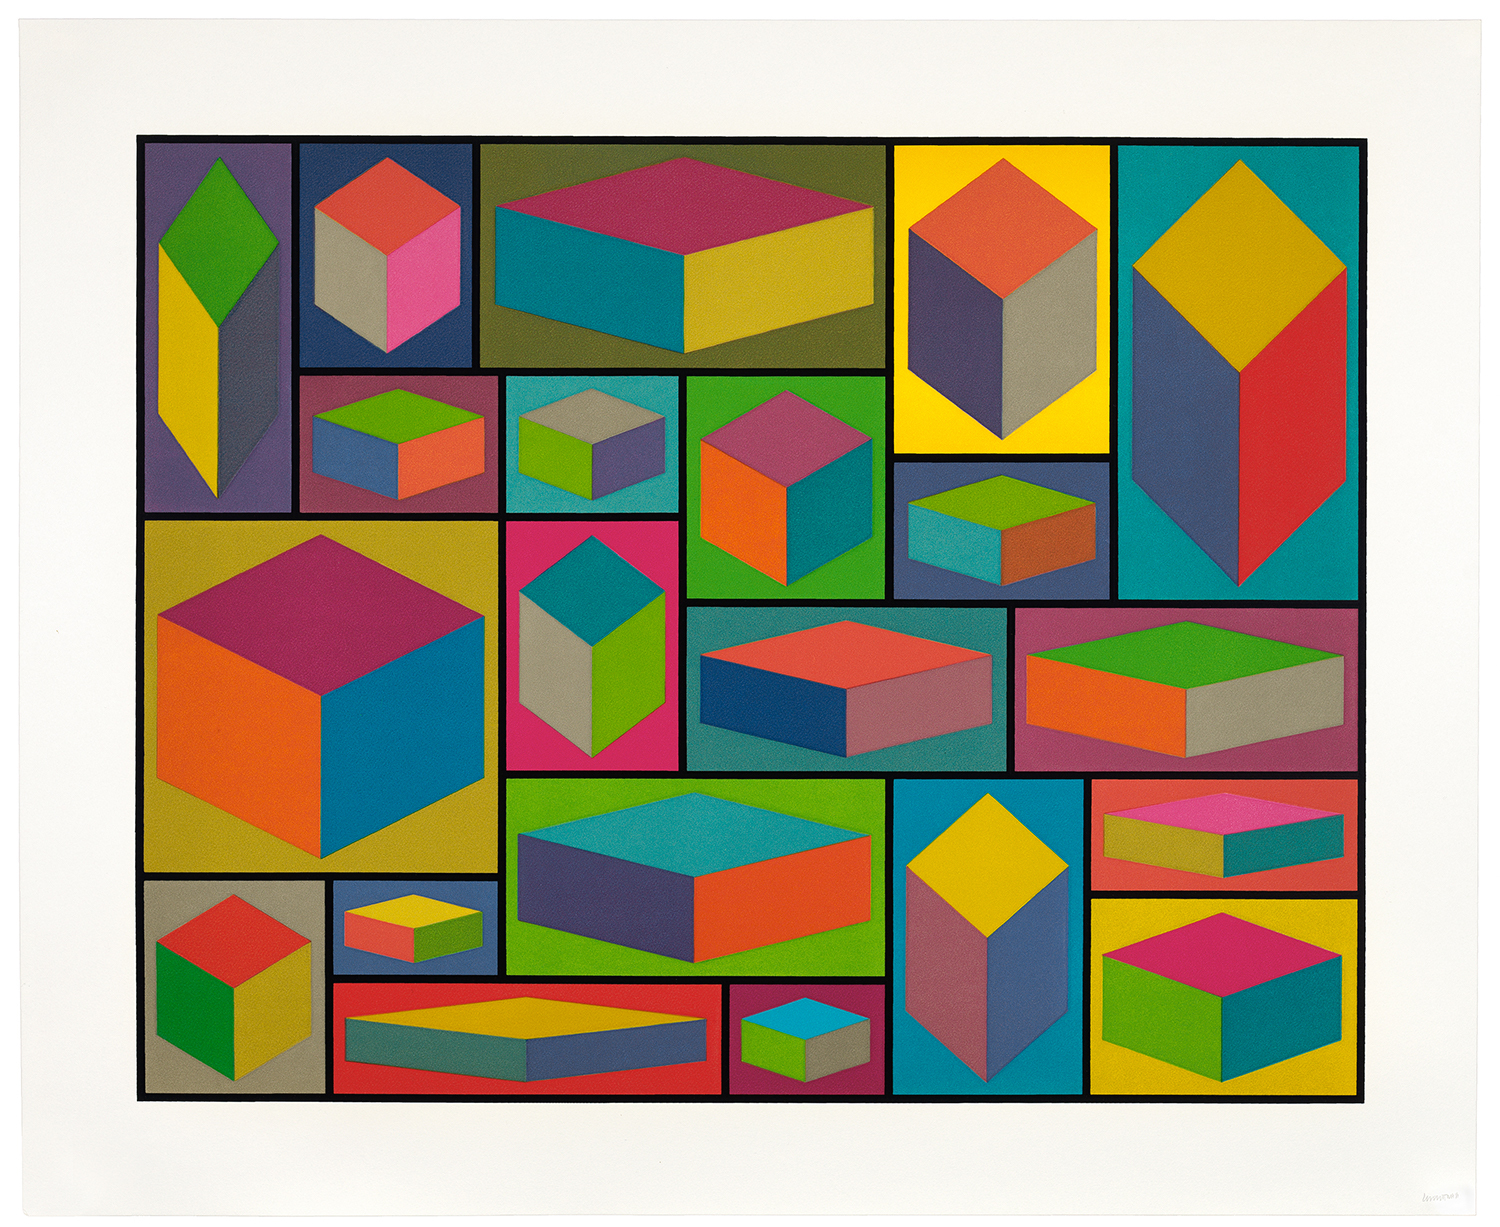 Sol LeWitt, <i> Distorted Cubes</i>, 2001, Set of 5 linocuts, 28 x 35 in., Catalogue Raisonne, NBMAA Collection